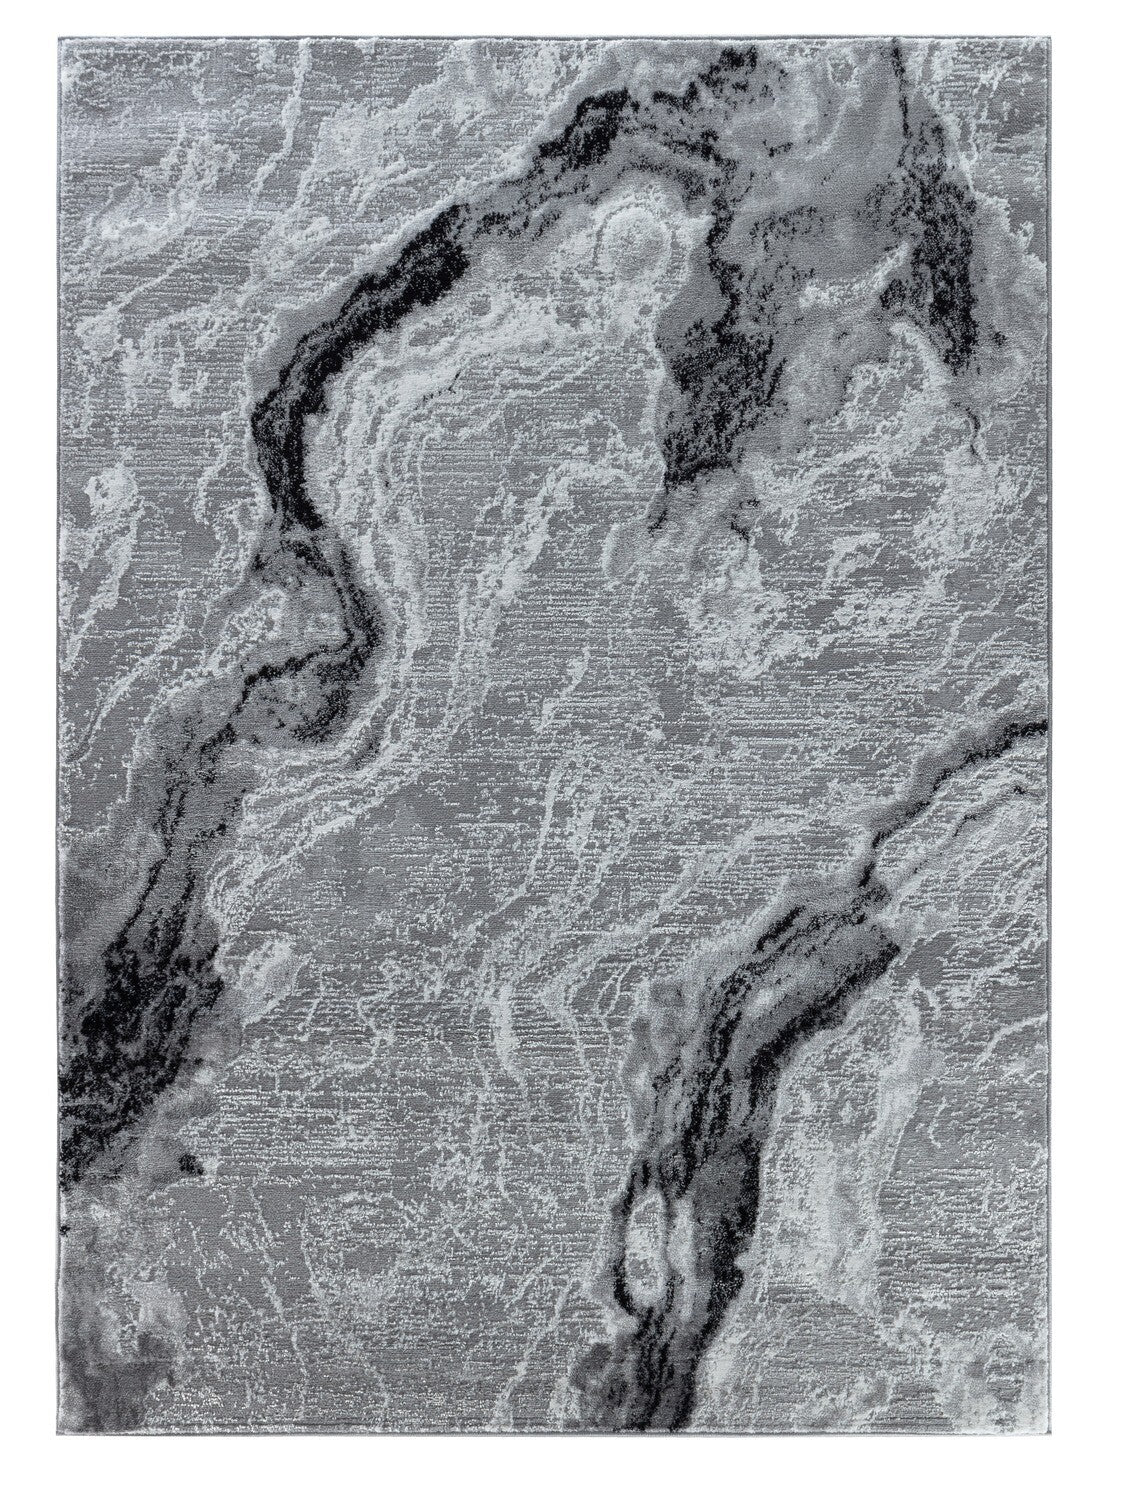 Glory Rugs Modern Abstract Area Rug Grey Black Rugs for Home Office Bedroom and Living Room